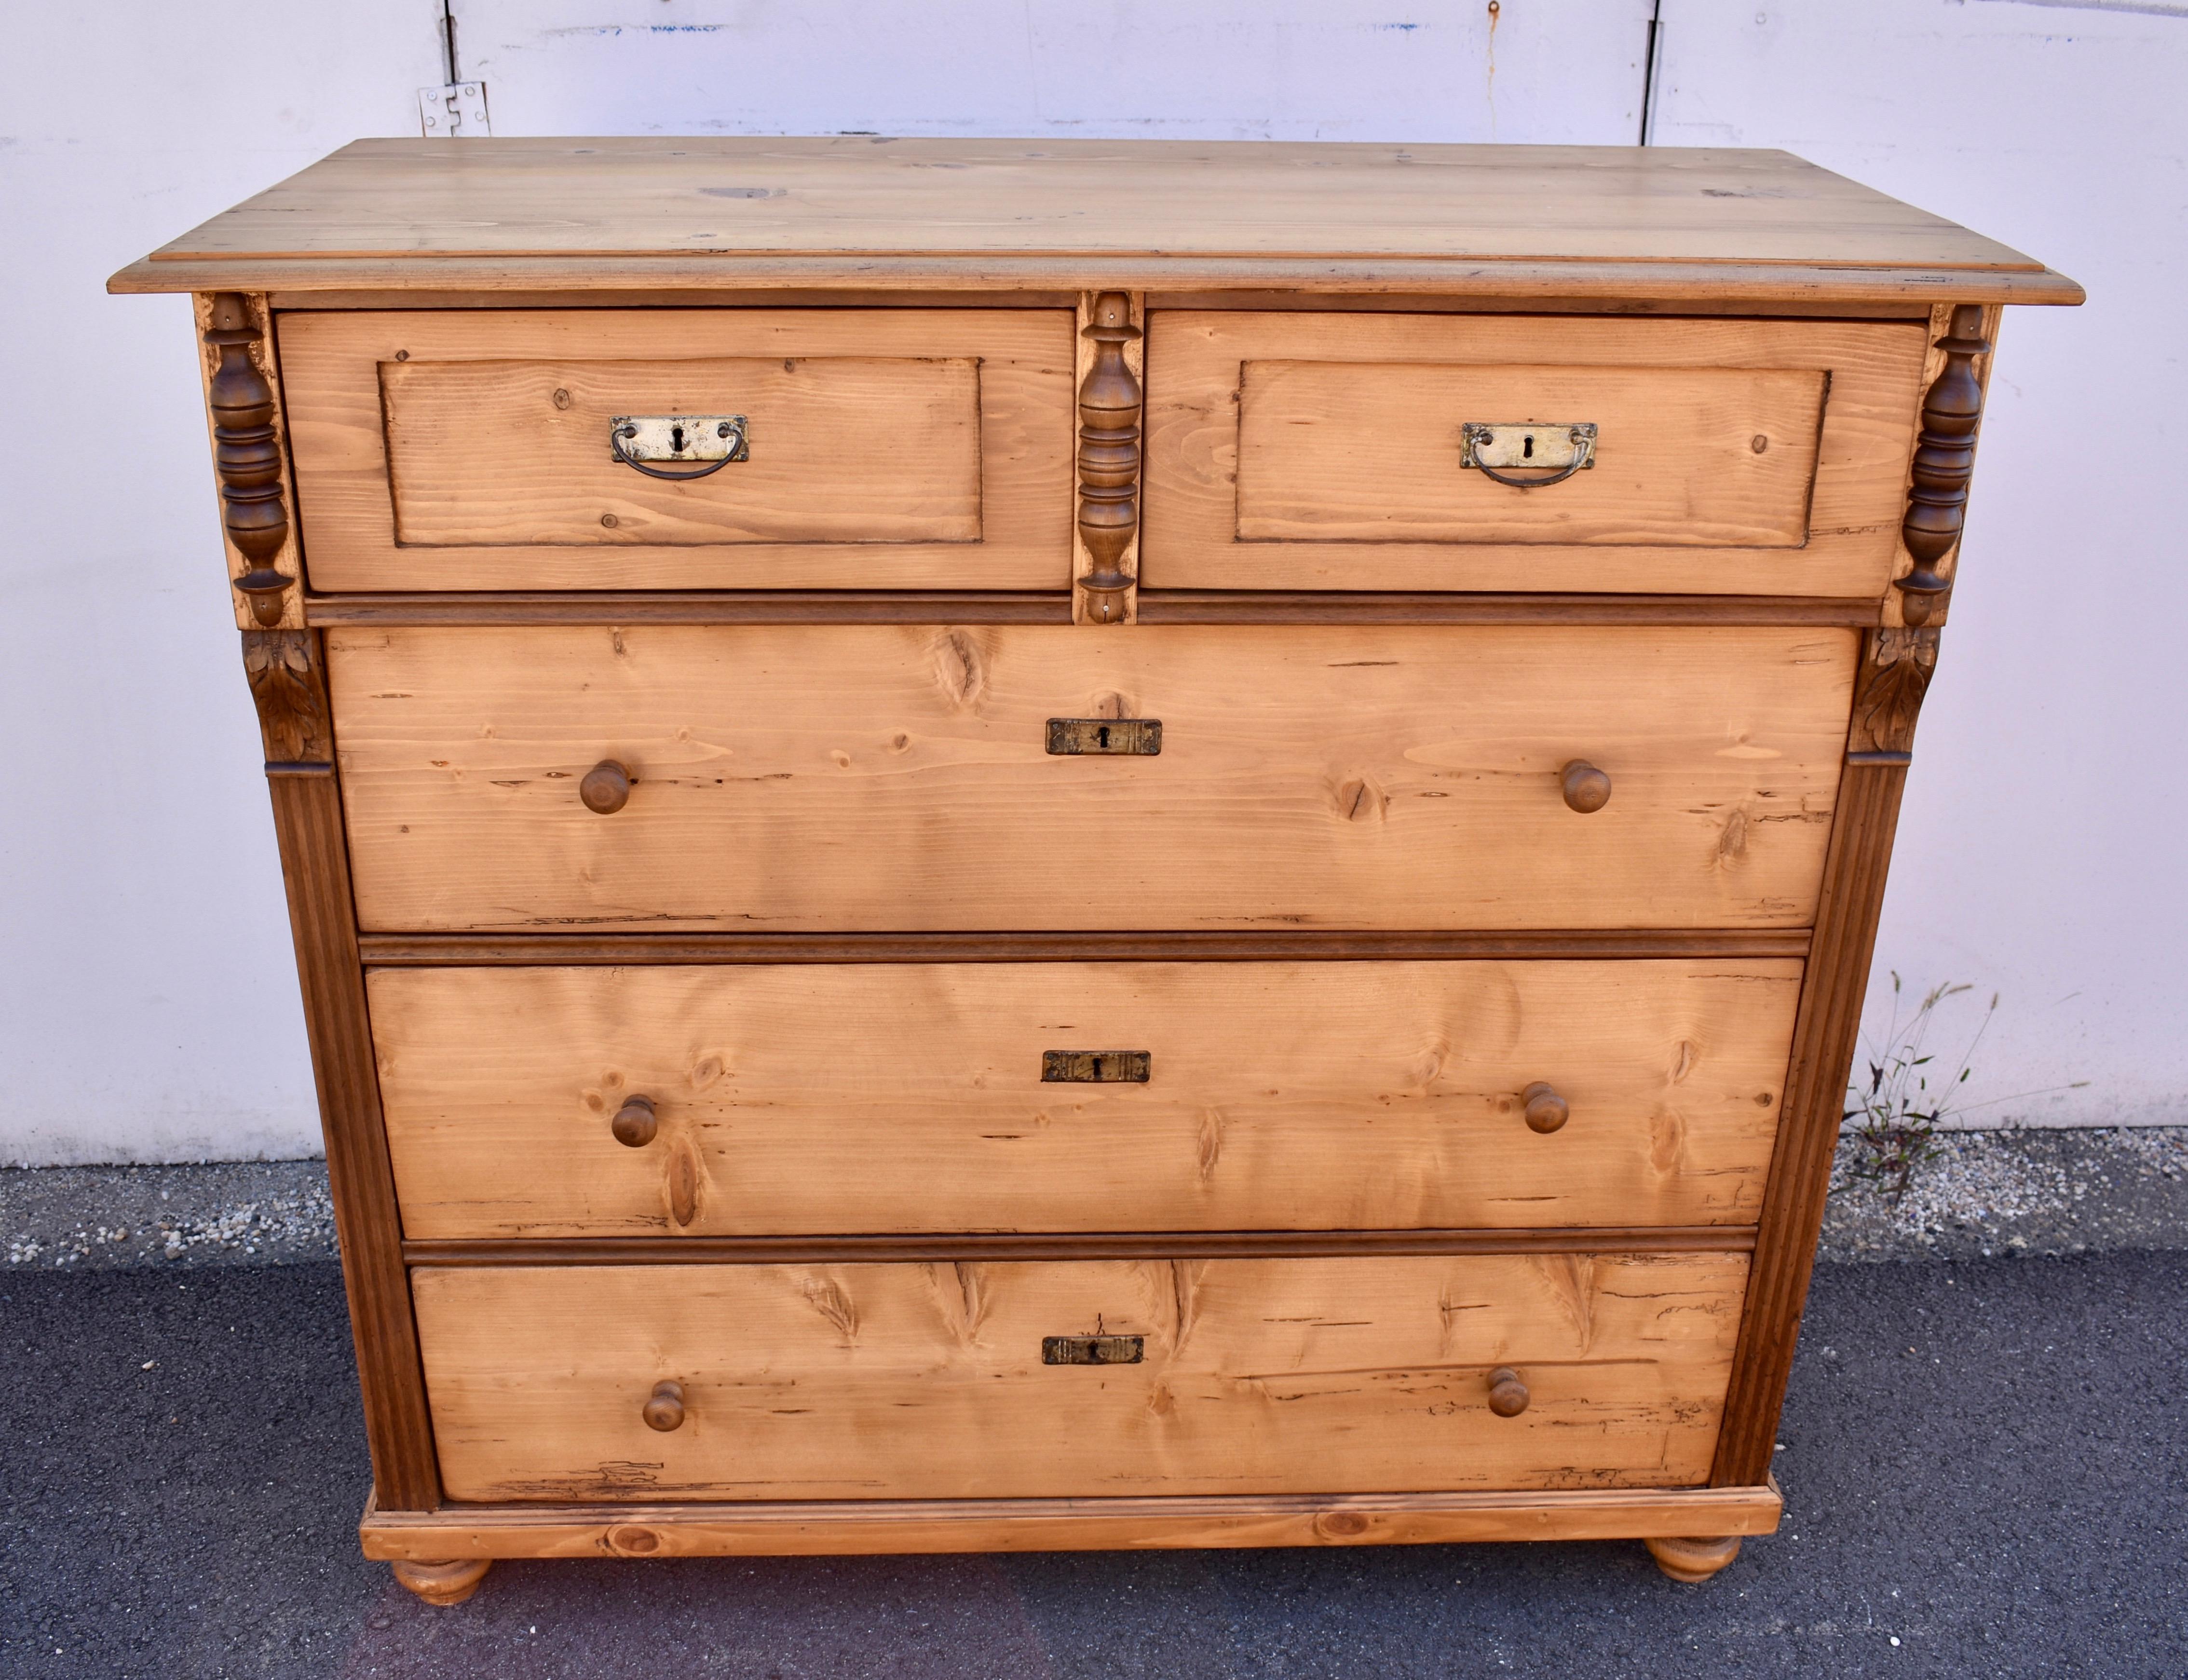 The breakfront case of this impressively large chest sets the two top drawers proud of the lower three.  Applied trim to the top drawers gives a faux paneled effect.  Between them is a hardwood split baluster, which repeats on the outside corners. 